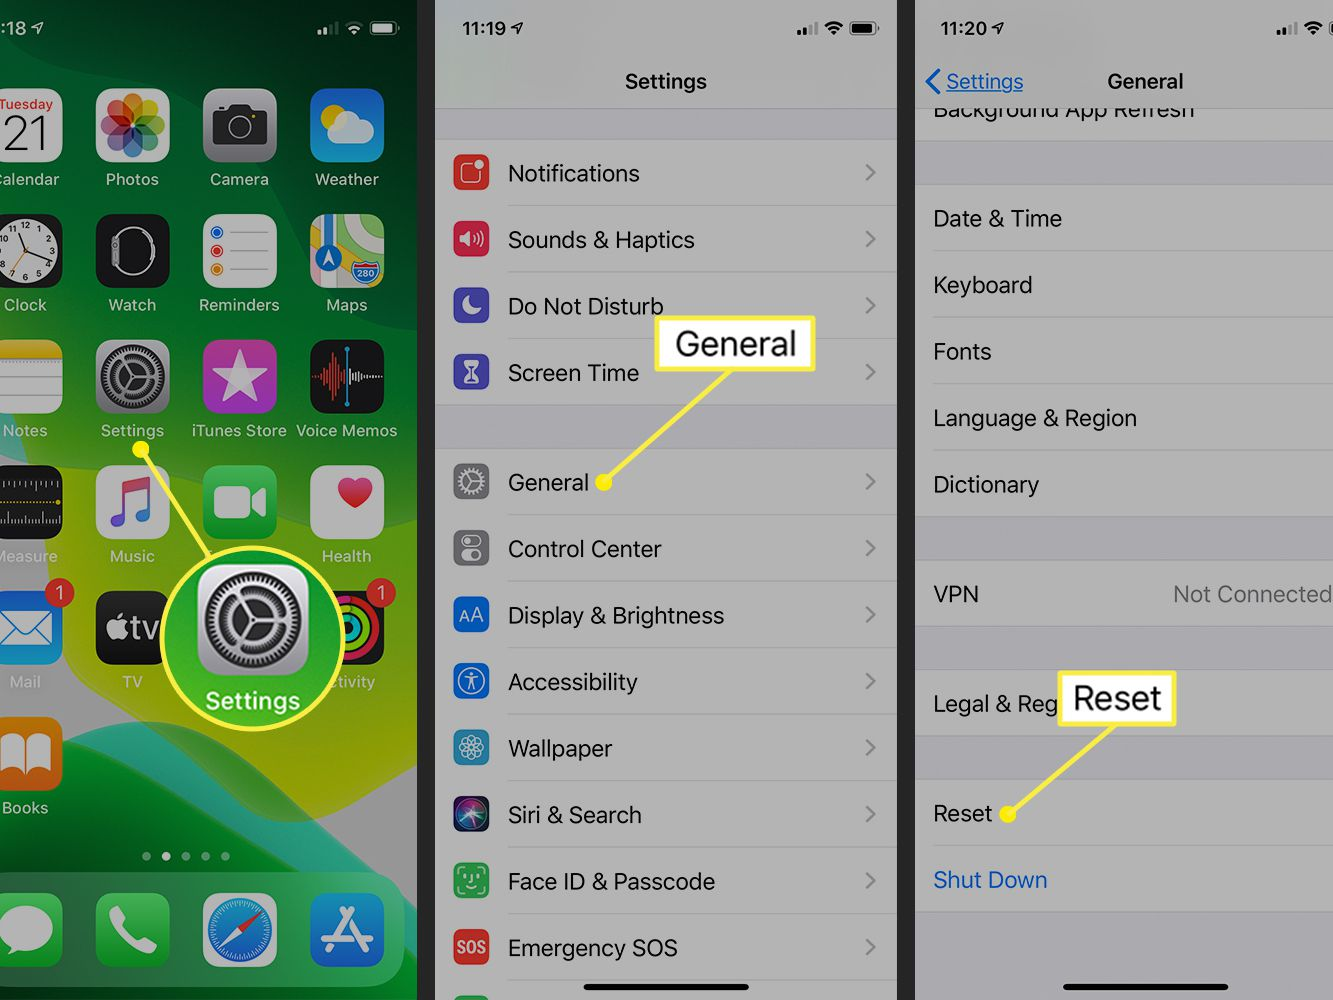 Reset Network Settings for iphone
